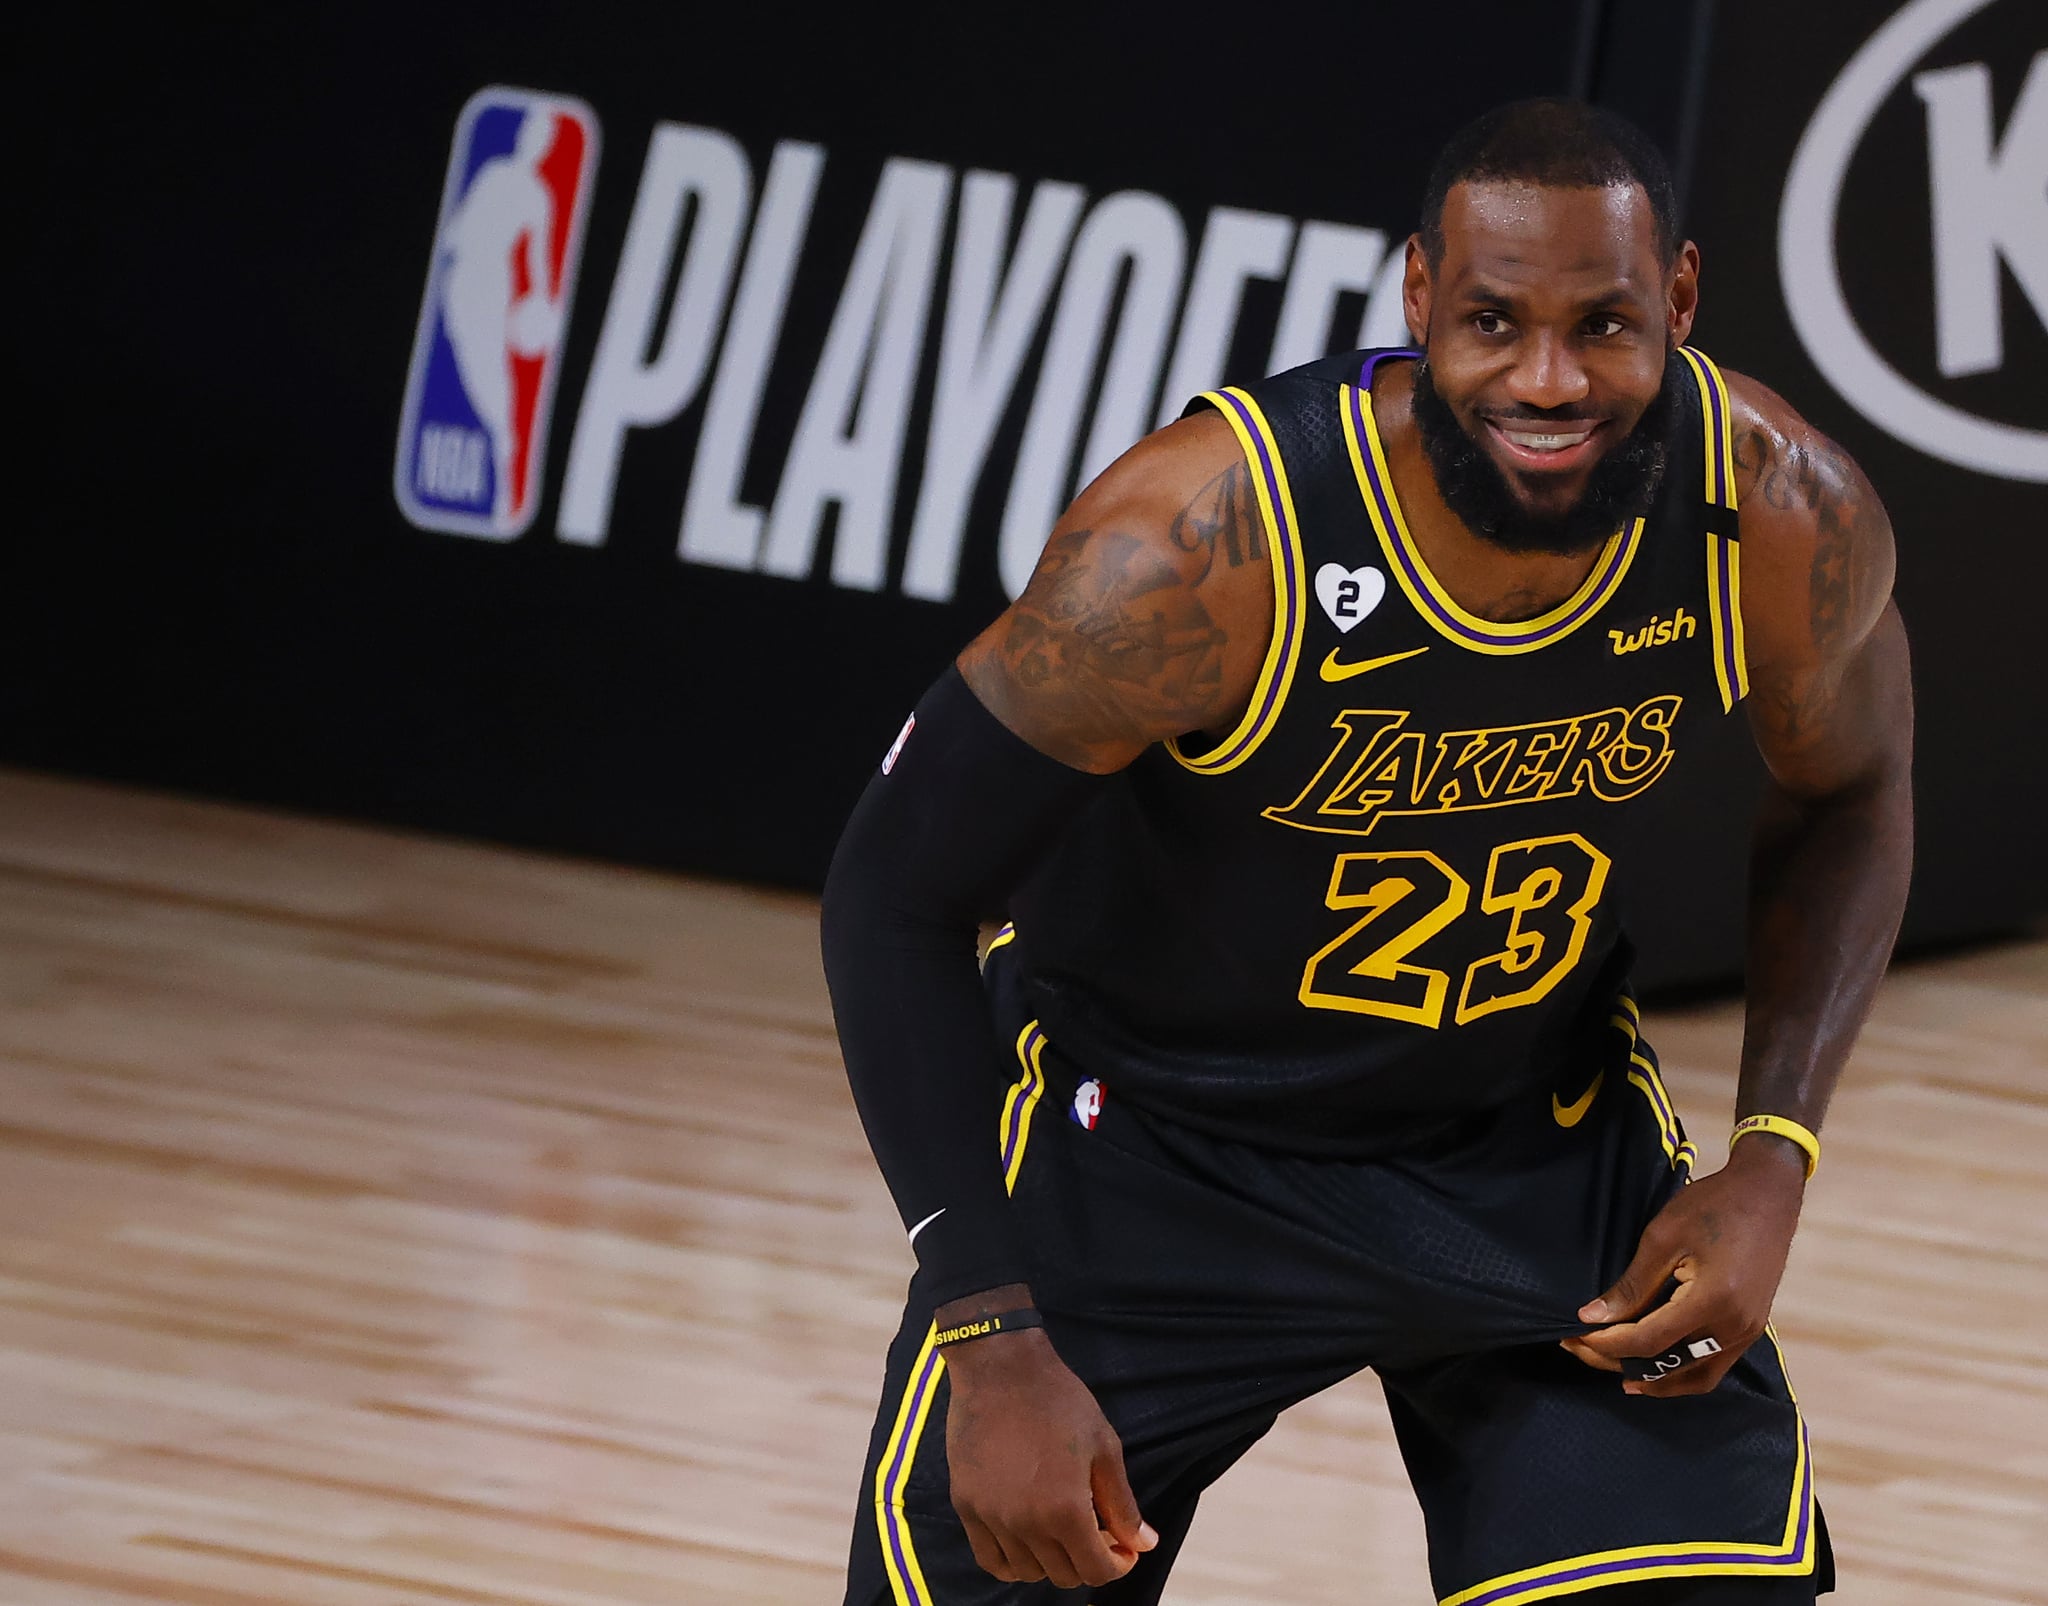 LAKE BUENA VISTA, FLORIDA - AUGUST 24: LeBron James #23 of the Los Angeles Lakers smiles as he gets ready for a play against the Portland Trail Blazers in Game Four of the Western Conference First Round during the 2020 NBA Playoffs at AdventHealth Arena at ESPN Wide World Of Sports Complex on August 24, 2020 in Lake Buena Vista, Florida. NOTE TO USER: User expressly acknowledges and agrees that, by downloading and or using this photograph, User is consenting to the terms and conditions of the Getty Images License Agreement. (Photo by Kevin C. Cox/Getty Images)